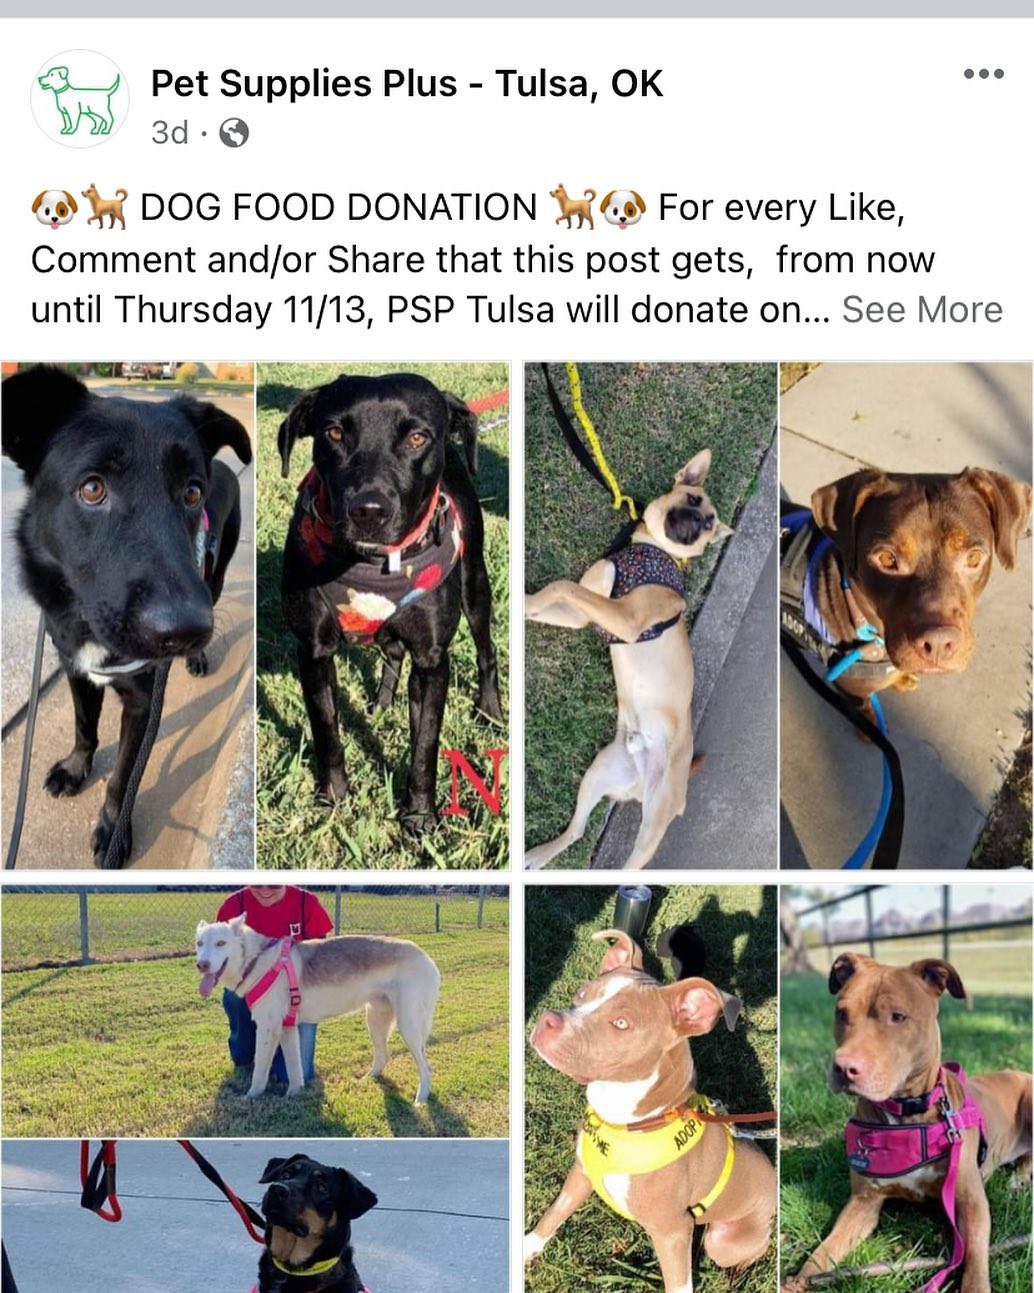 Help us get FREE pet food! 🐶🐱 Please like, comment on, AND share the ORIGINAL Facebook post on Pet Supplies Plus - Tulsa, OK page! It’s a few posts down now. 

For each like, comment, and share on the original Facebook post, Pet Supplies Plus will donate one pound of pet food to OAA. 

We are distributing nearly 400-500 lbs. of pet food a week through our Pet Food Pantry to pet owners who are experiencing short-term financial hardship or are just down on their luck. This food is desperately needed! <a target='_blank' href='https://www.instagram.com/explore/tags/tulsa/'>#tulsa</a> <a target='_blank' href='https://www.instagram.com/explore/tags/tulsaok/'>#tulsaok</a> <a target='_blank' href='https://www.instagram.com/explore/tags/tulsaoklahoma/'>#tulsaoklahoma</a> <a target='_blank' href='https://www.instagram.com/explore/tags/tulsapets/'>#tulsapets</a> <a target='_blank' href='https://www.instagram.com/explore/tags/helpingpets/'>#helpingpets</a> <a target='_blank' href='https://www.instagram.com/explore/tags/helpingpetsinneed/'>#helpingpetsinneed</a>